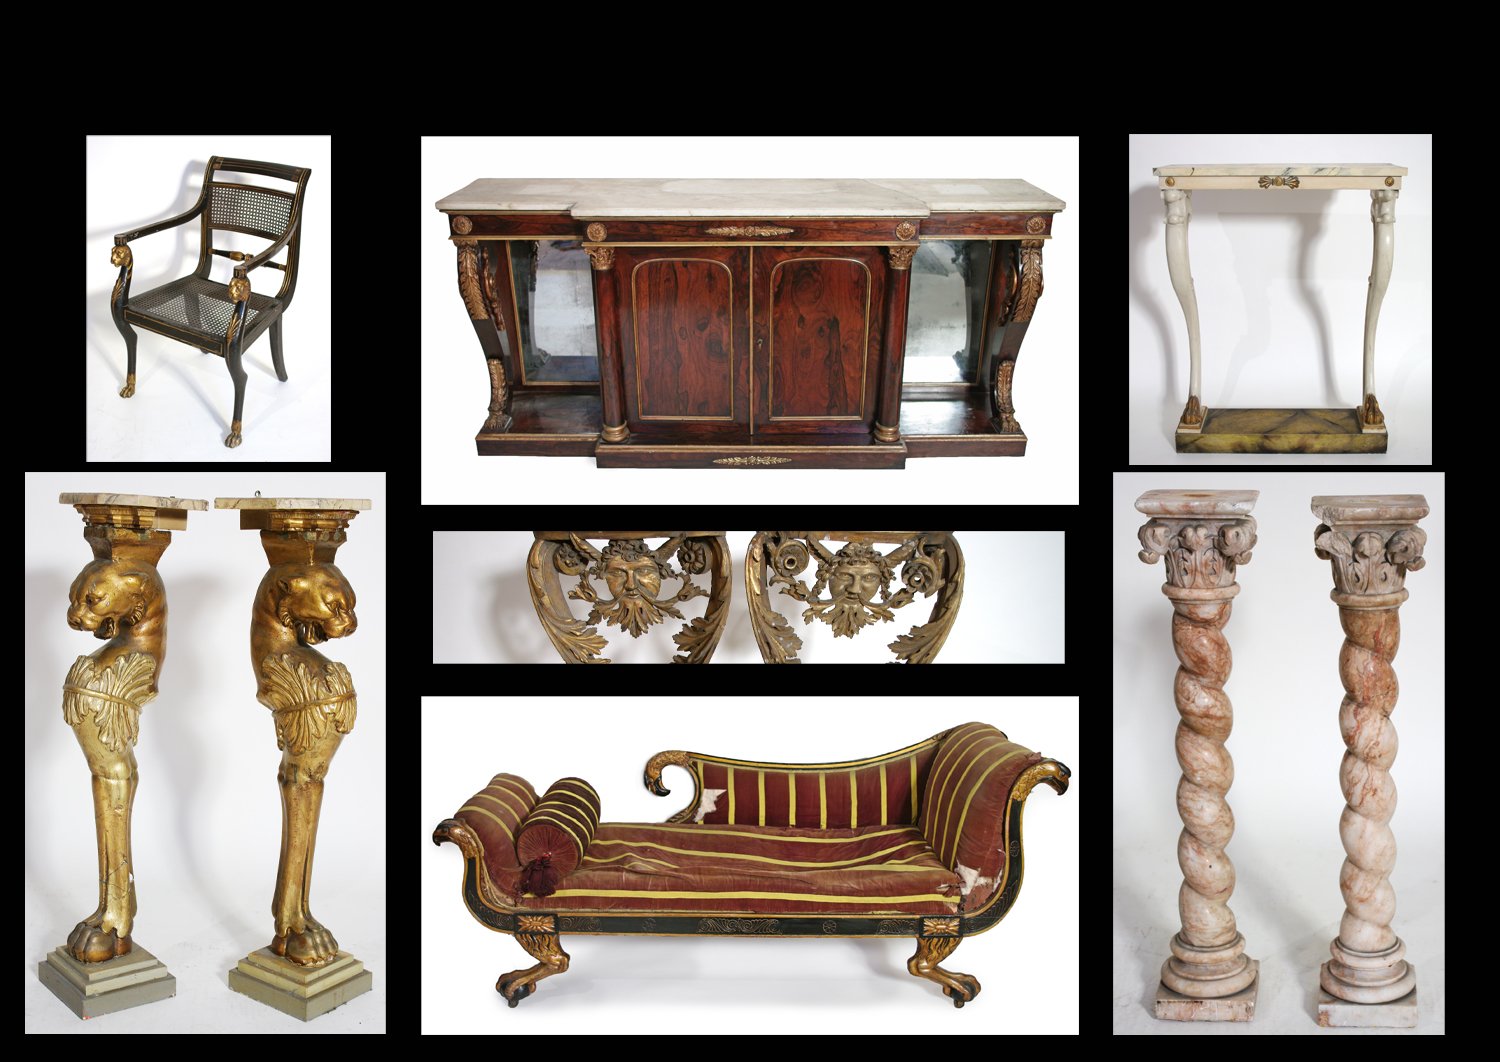 A SINGLE-OWNER COLLECTION OF REGENCY FURNITURE &amp; FURNISHINGS